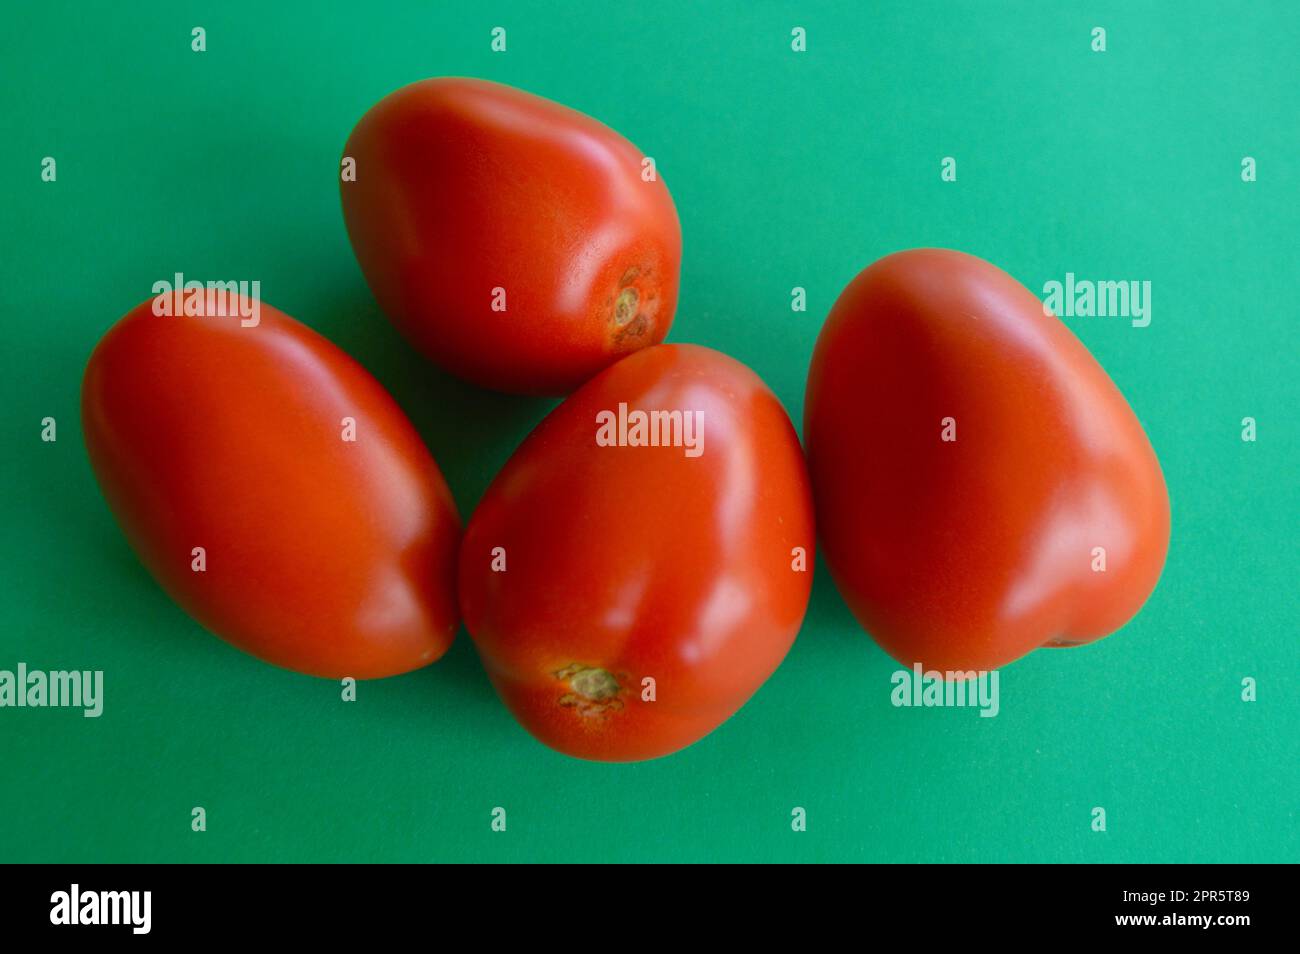 Roma tomatoes on a simple background Stock Photo